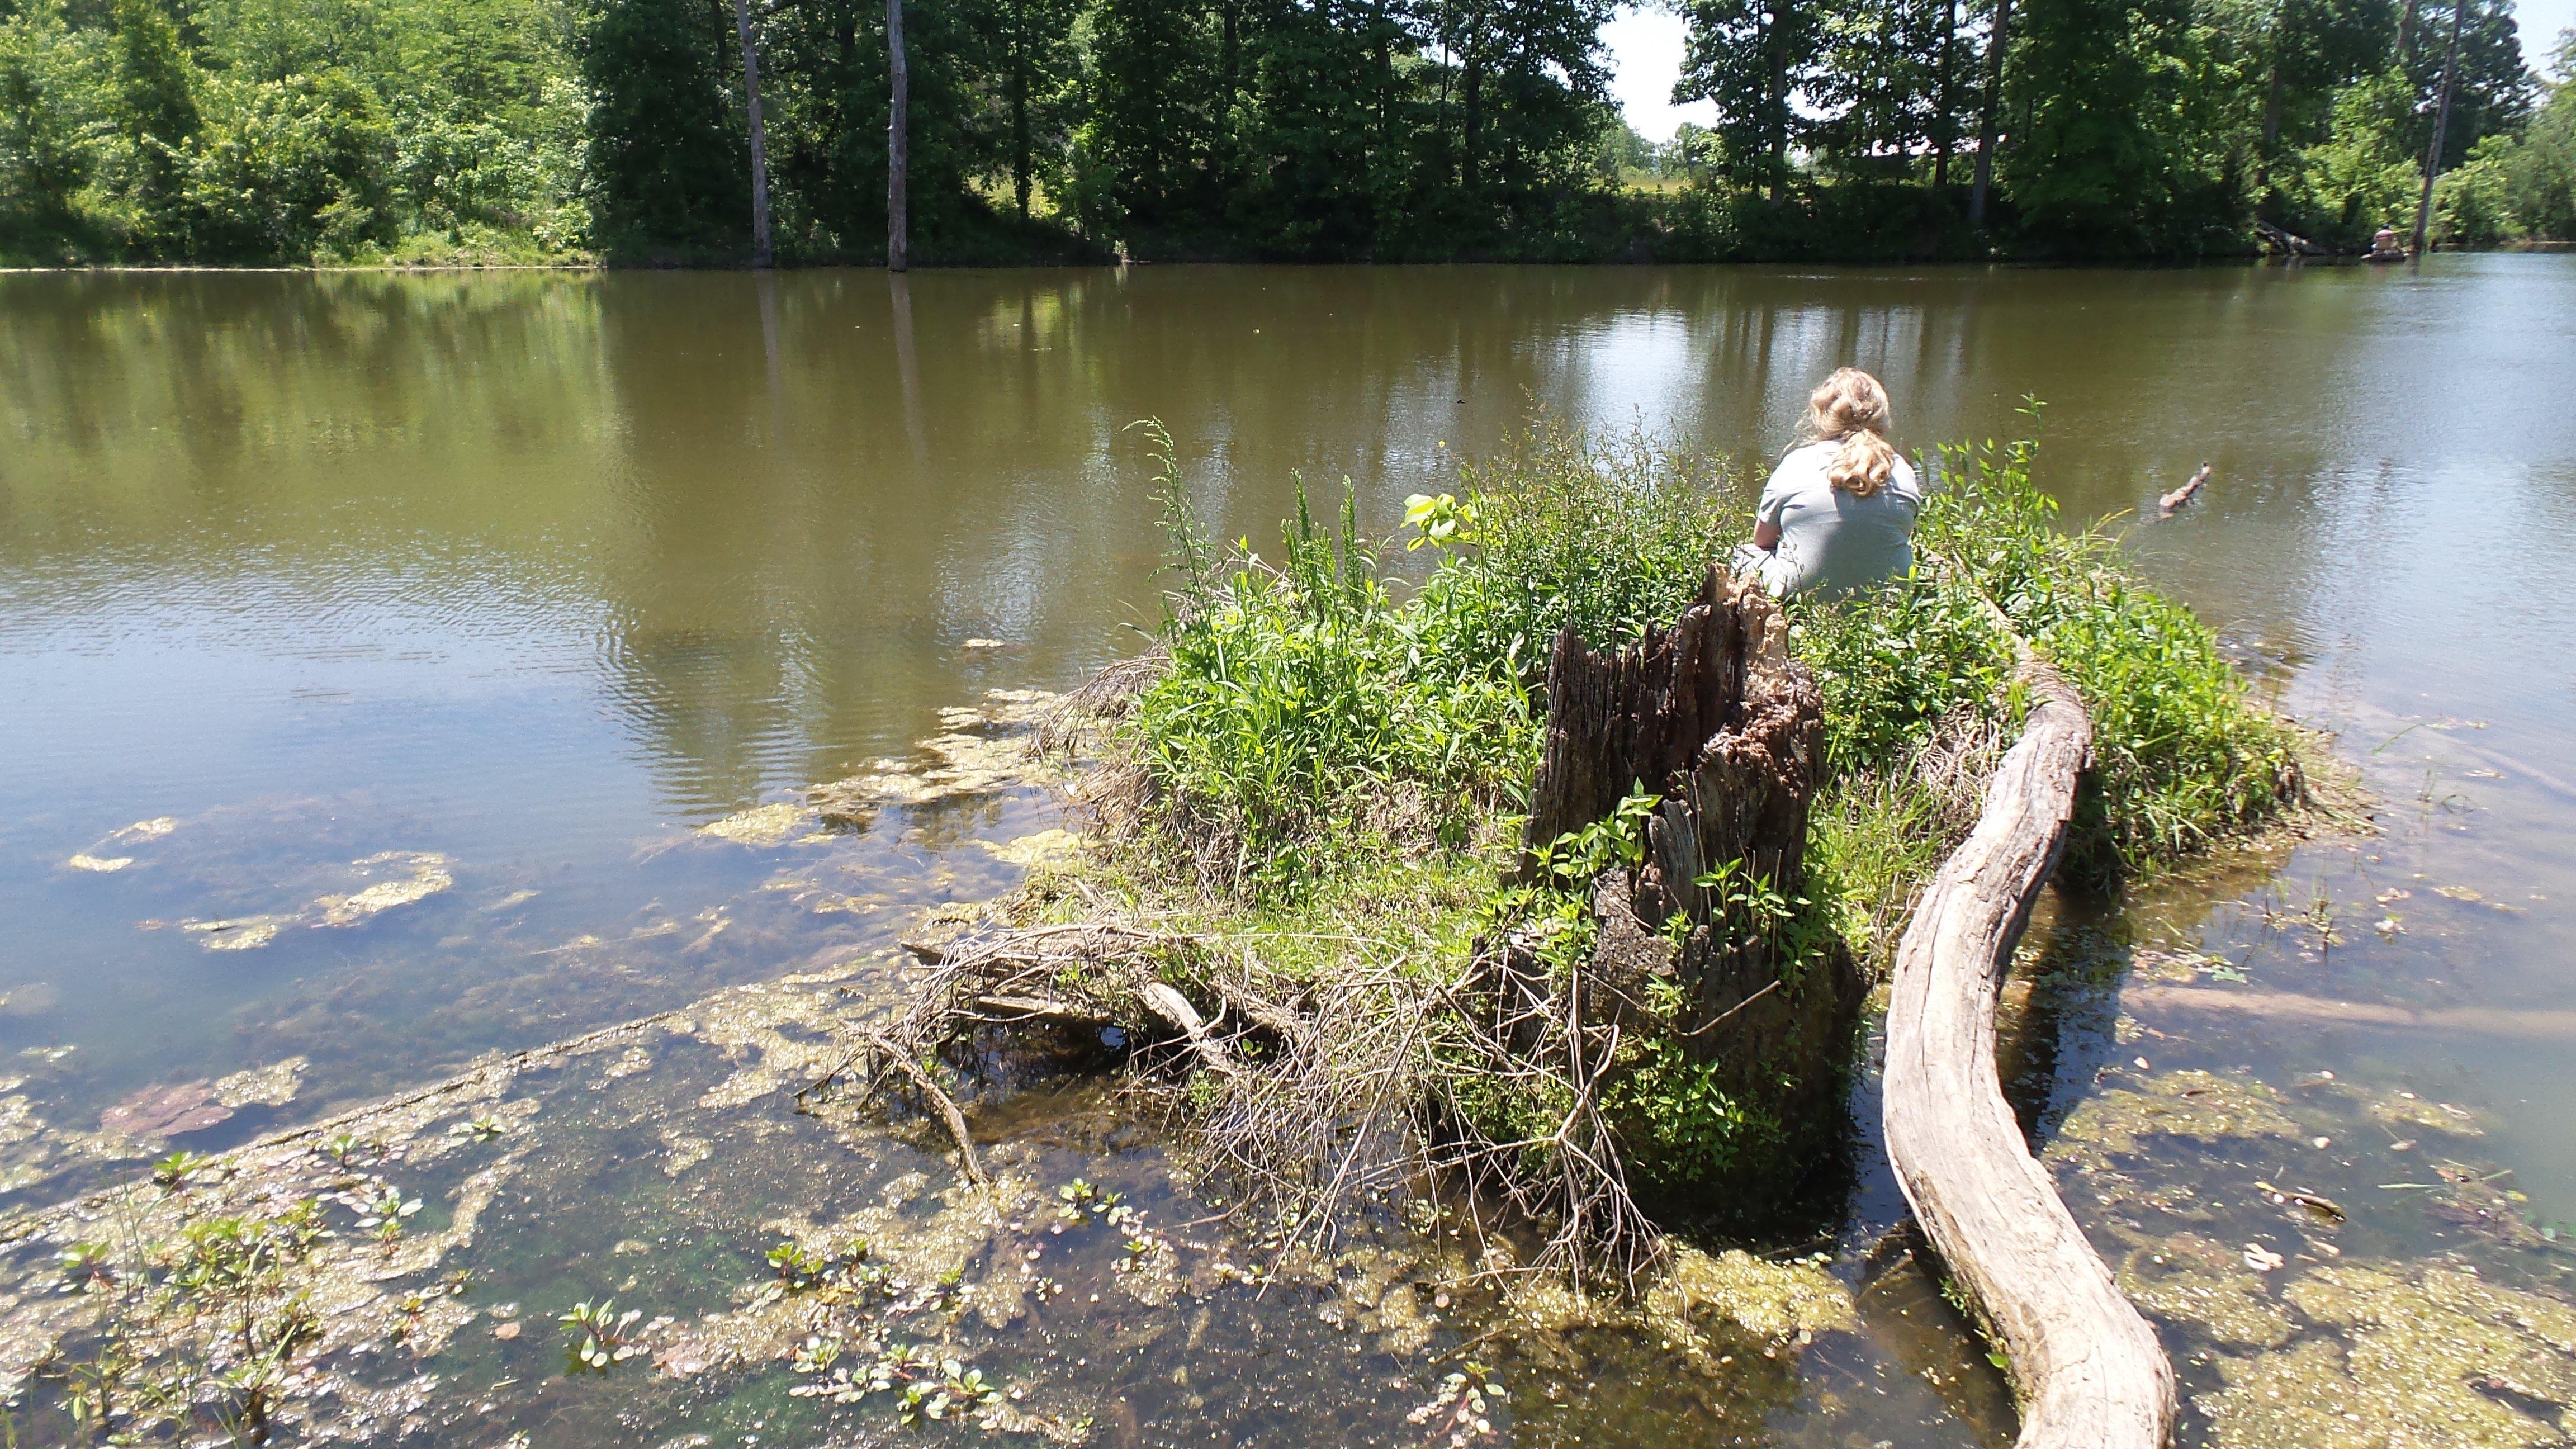 Michaela insisted that crossing the log to the island would put her in the perfect spot.